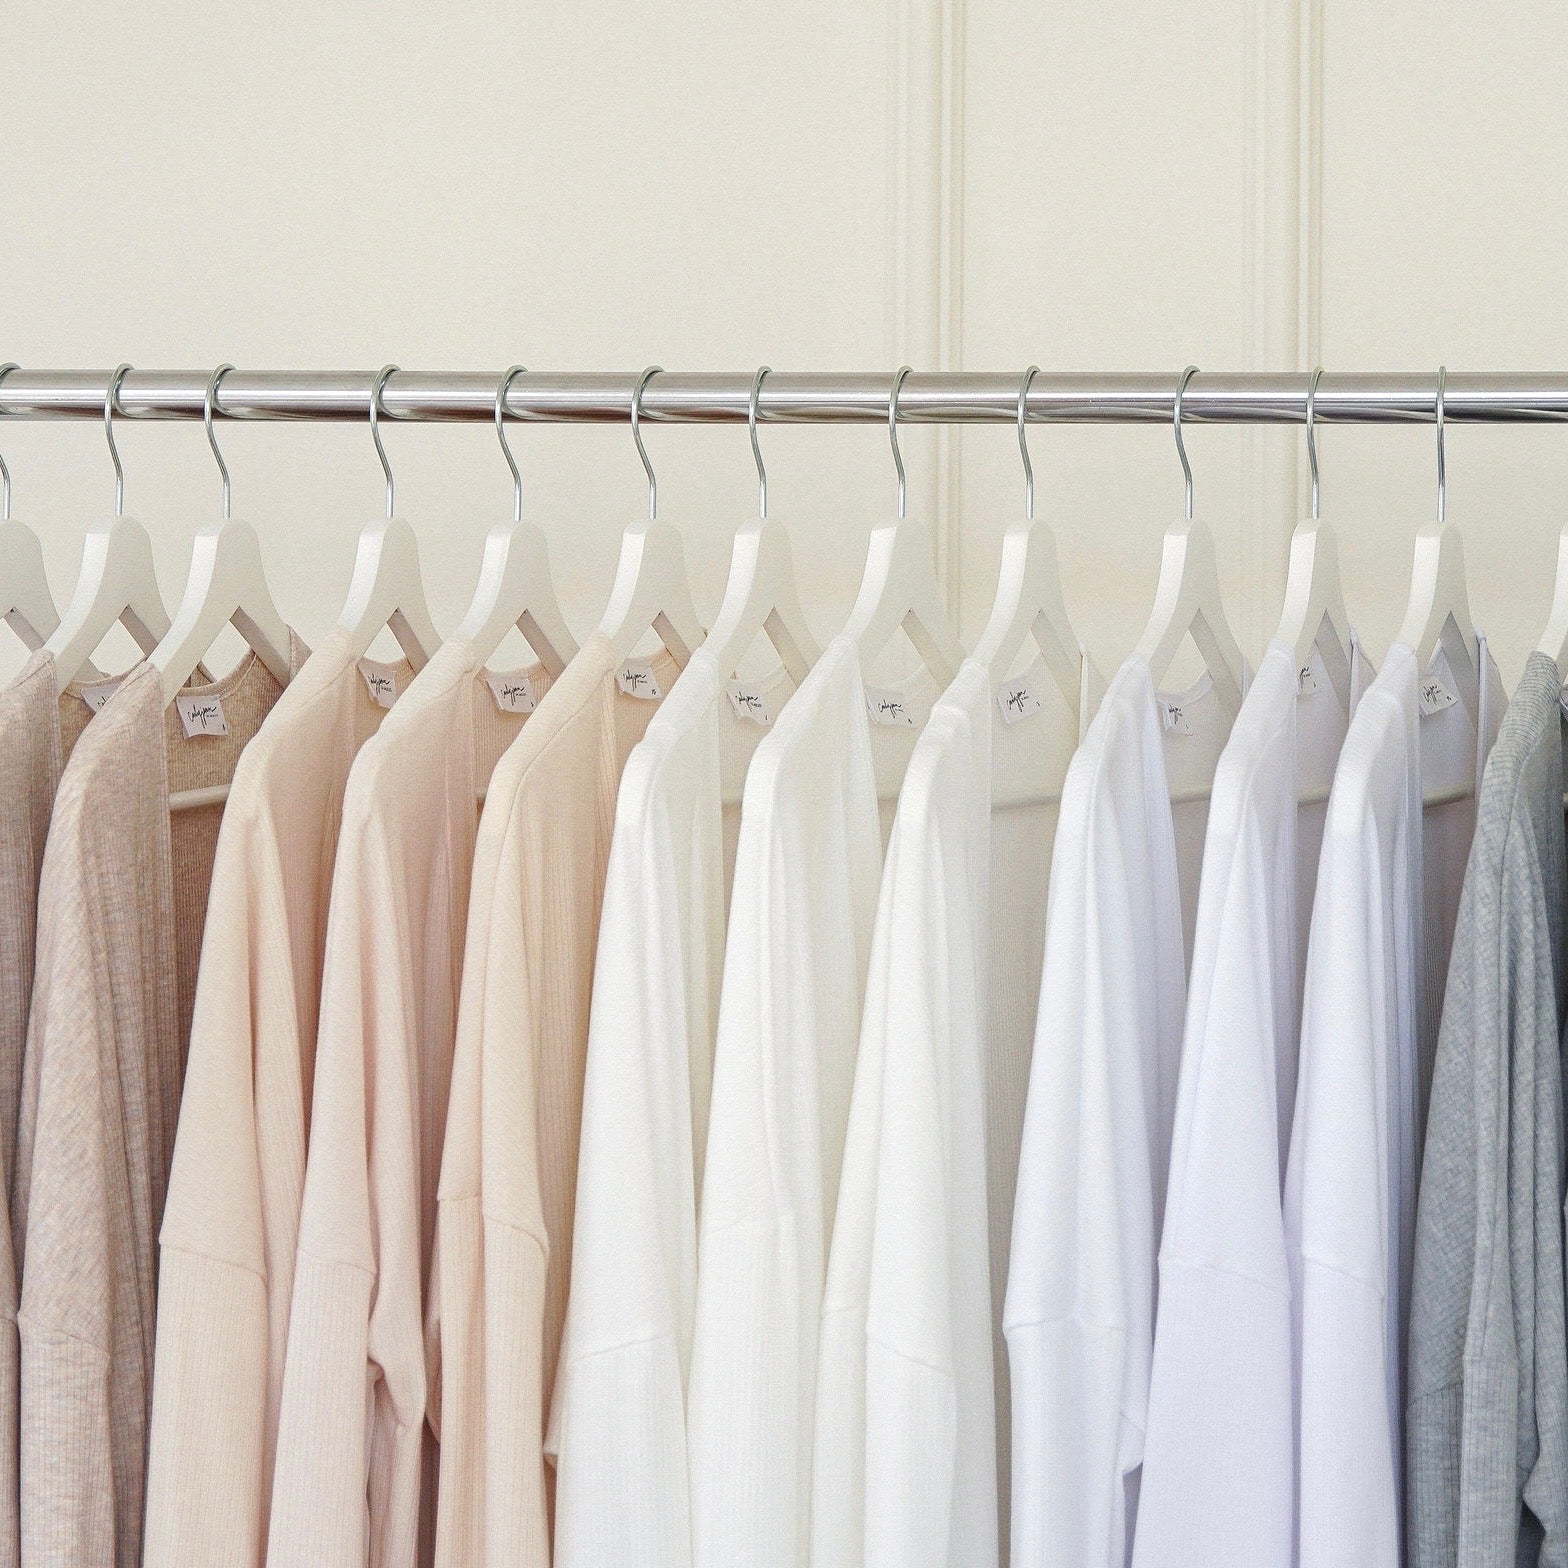 How to Care For Your Clothing: 5 Easy Steps